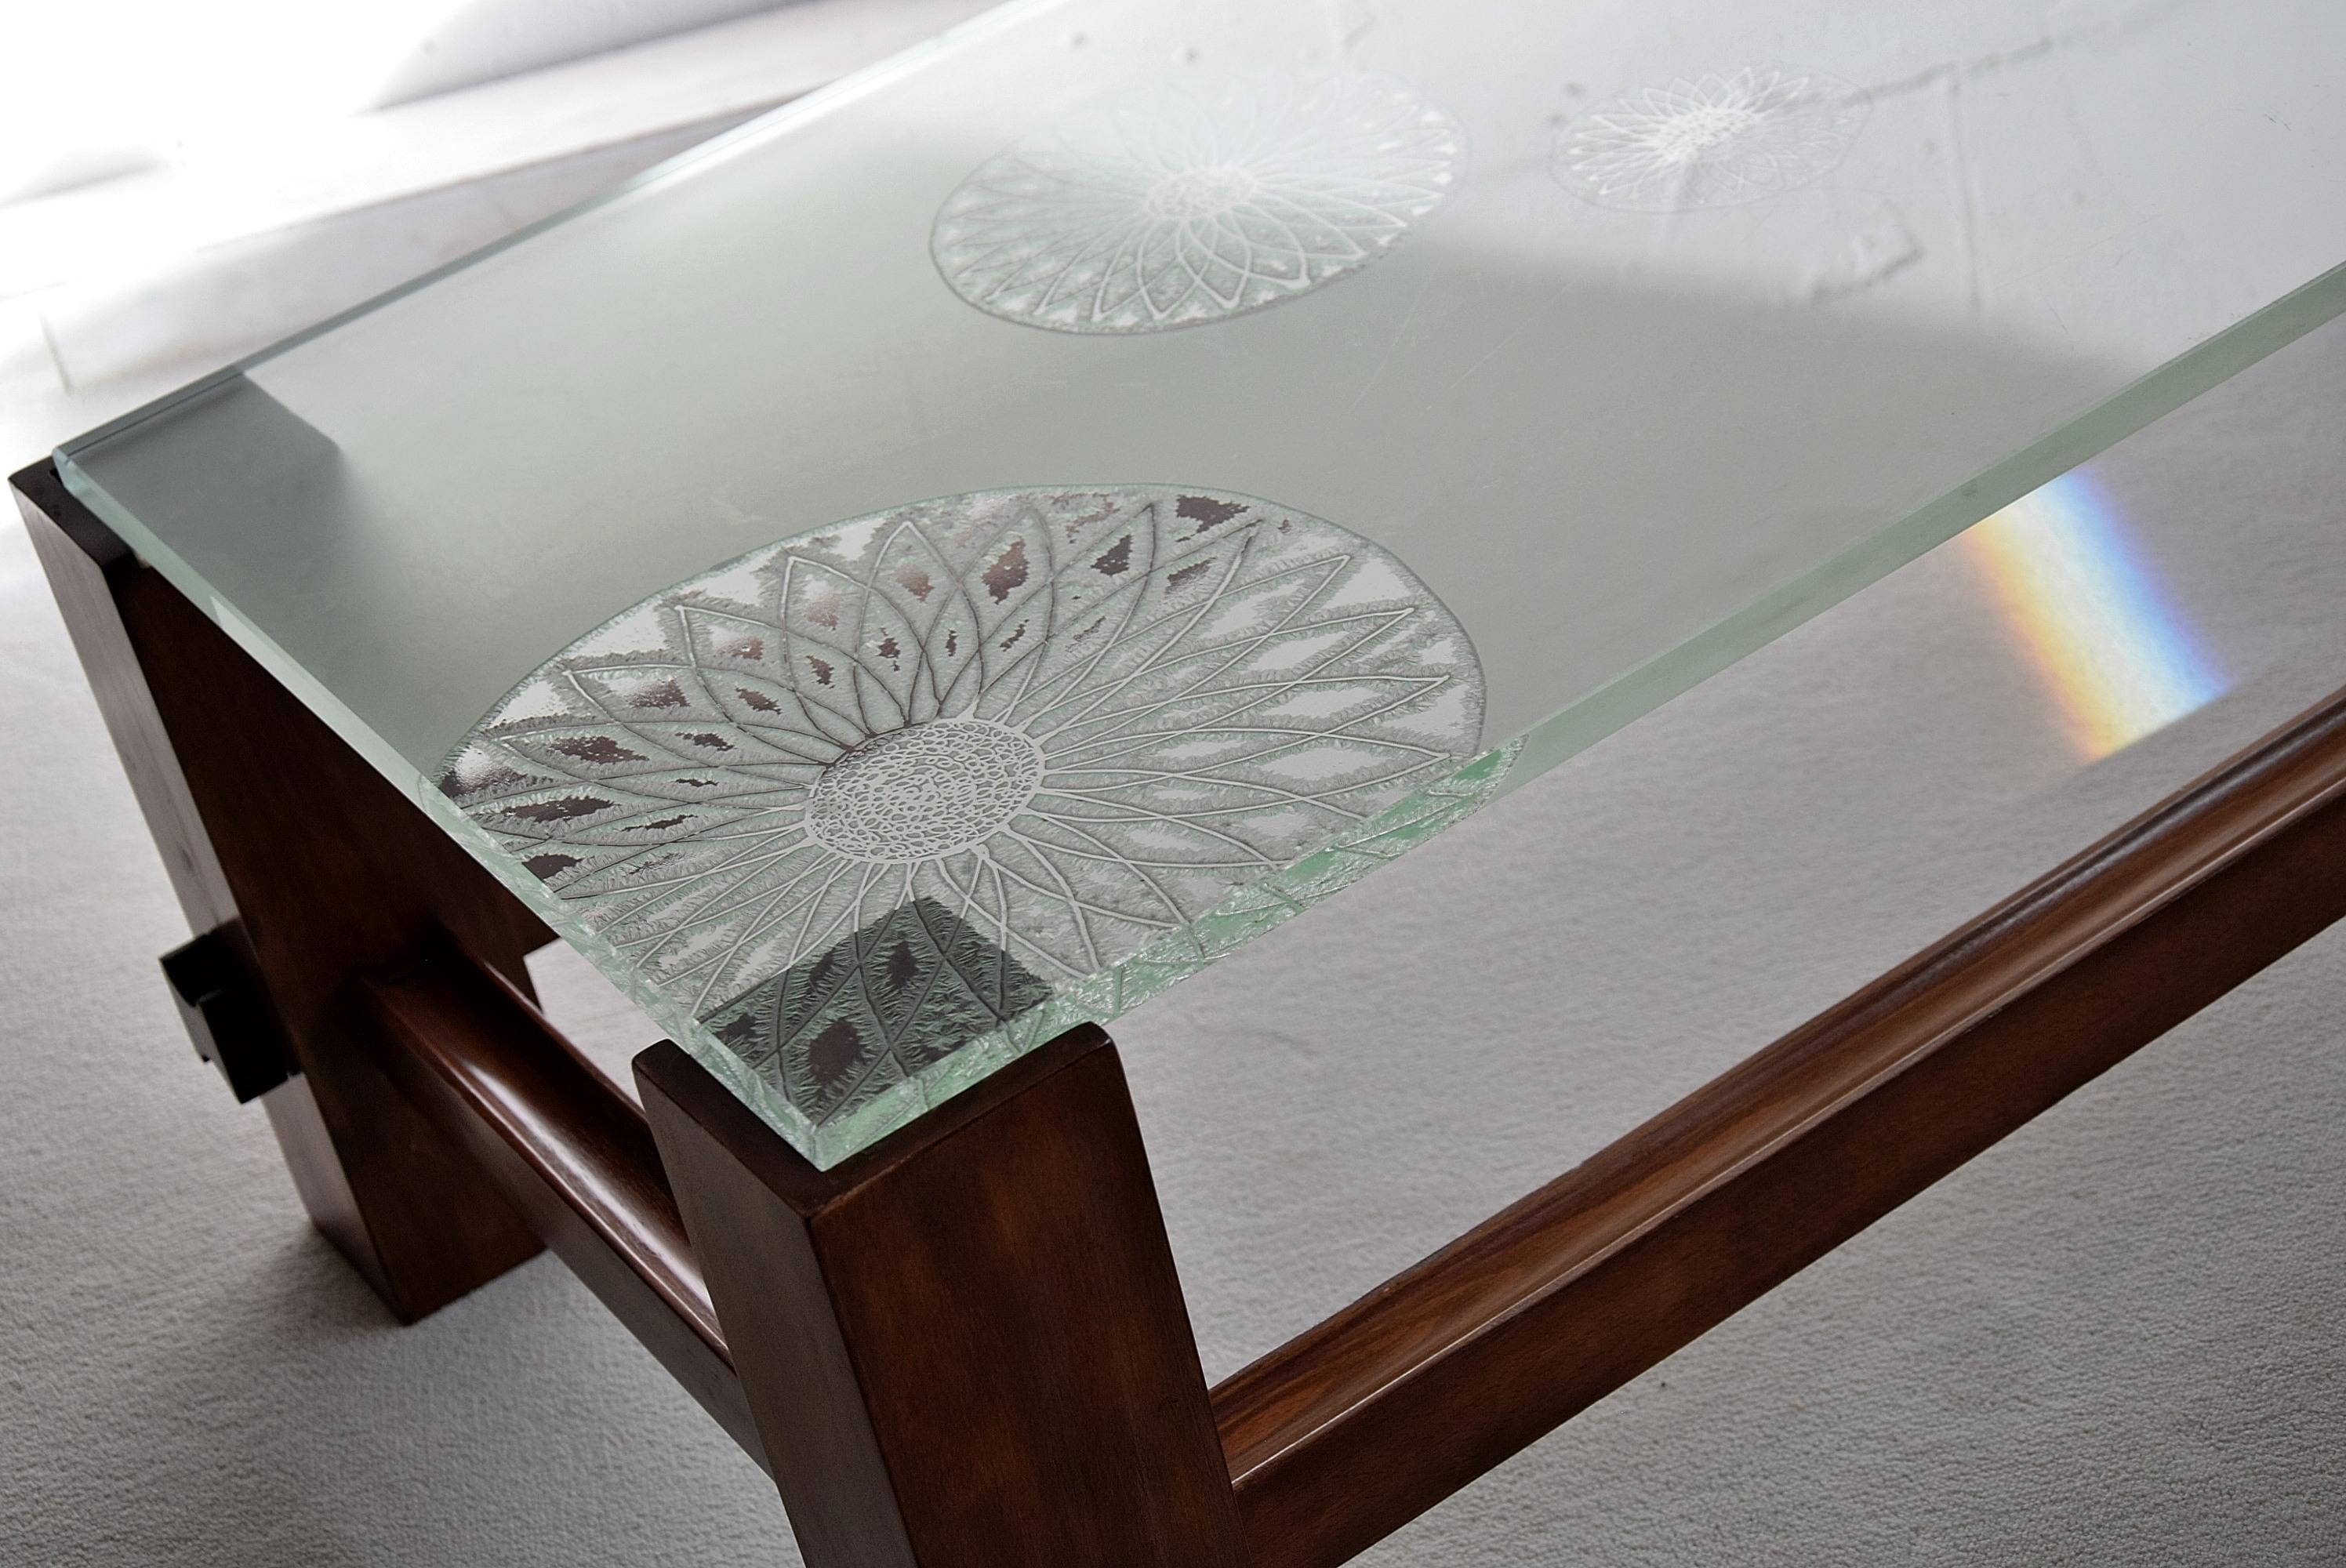 Fontana Arte Mid-Century Modern coffee table by Max Ingrand.
Stylish and sophisticated tainted beech coffee table designed by Max Ingrand for Fontana Arte in the 1960s. This version of model 2461 is rare to come by with the etched sunflowers thick